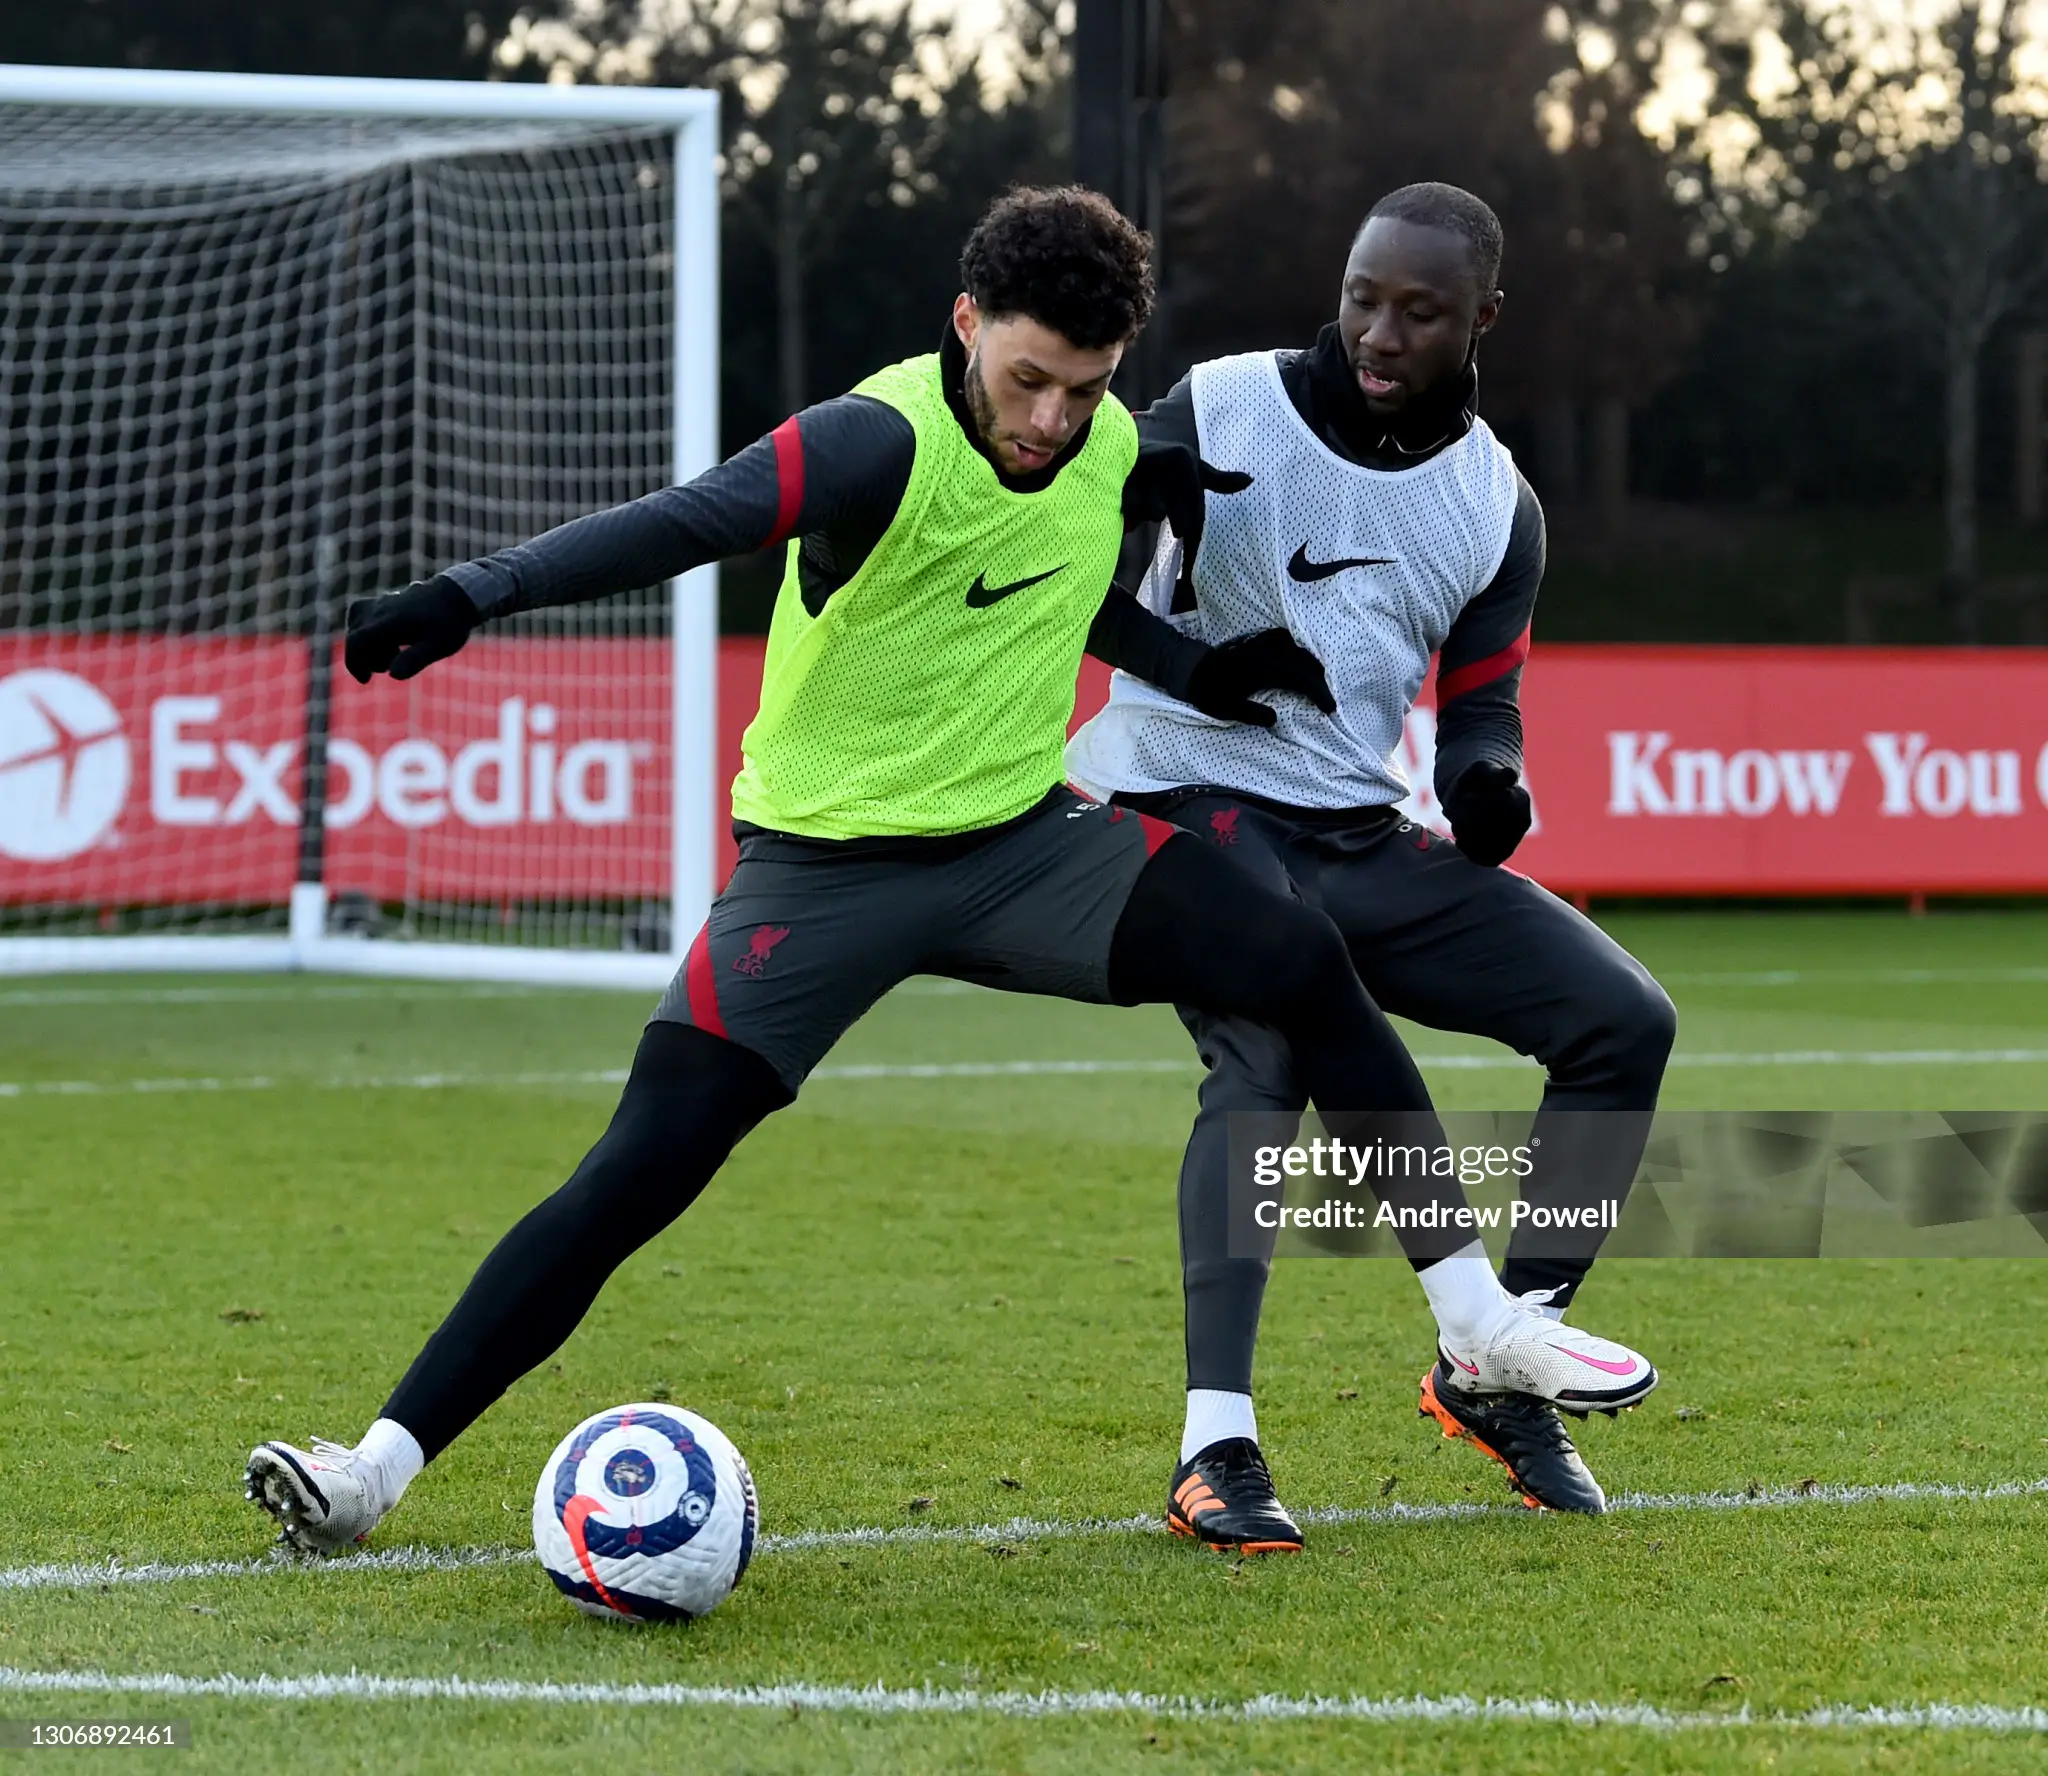 Liverpool duo Naby Keita and Alex Oxlade-Chamberlain could leave the club for free in 2023. (Photo by Andrew Powell/Liverpool FC via Getty Images)